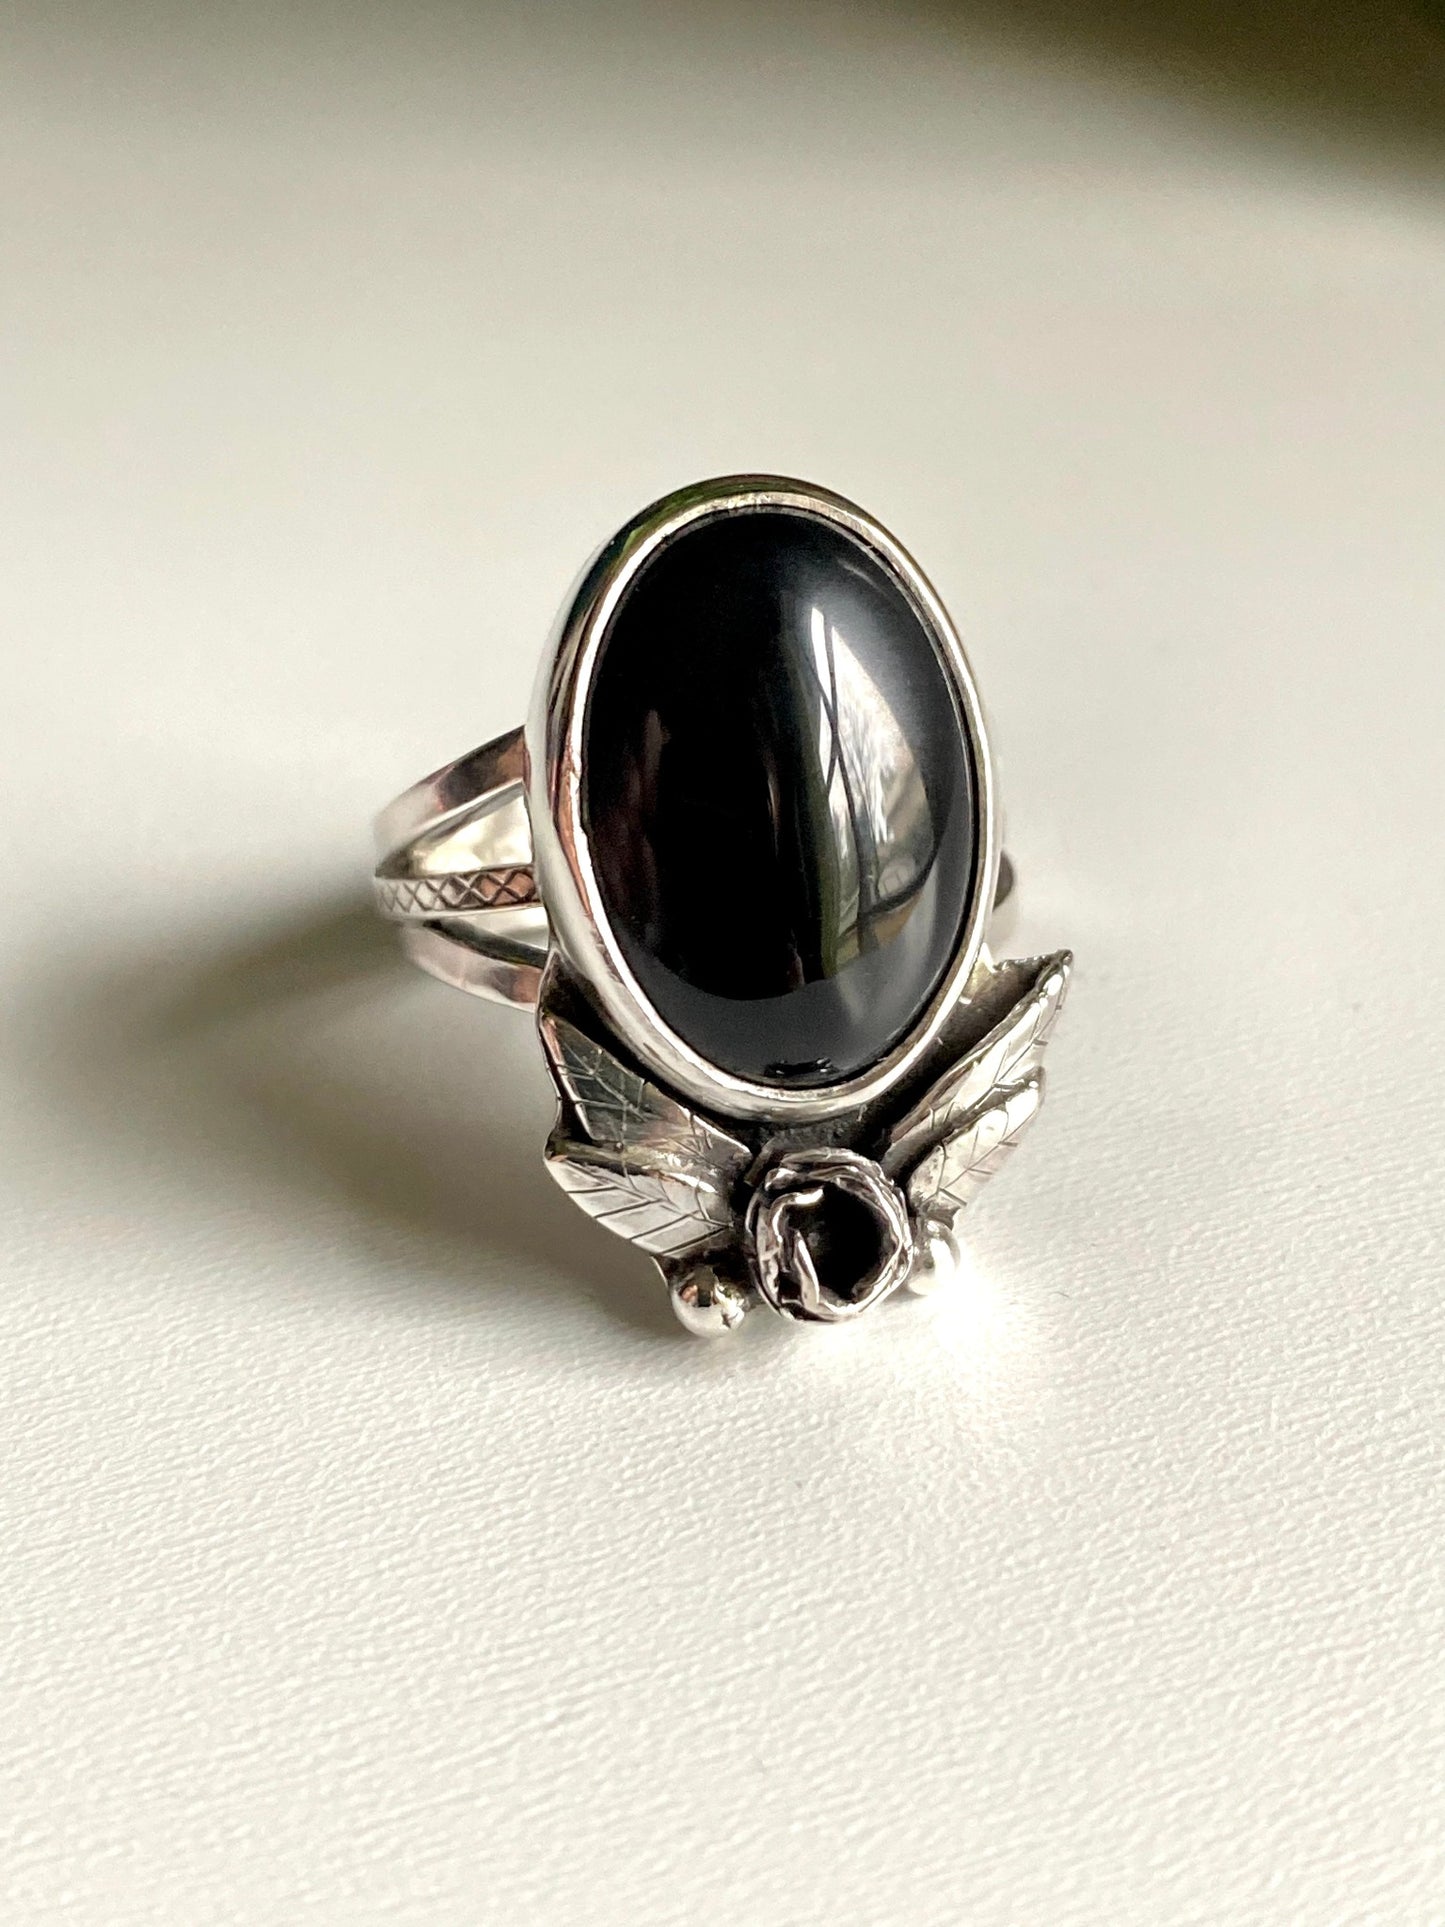 Onyx rose statement ring, Large onyx stone with rose below surrounded by 2 petals on each side, four total. hand carved leaves with two pieces of granulation at bottom. Ring is a triple strand shank two smooth square bands and one square middle band with tiny detail work looking like lattice.